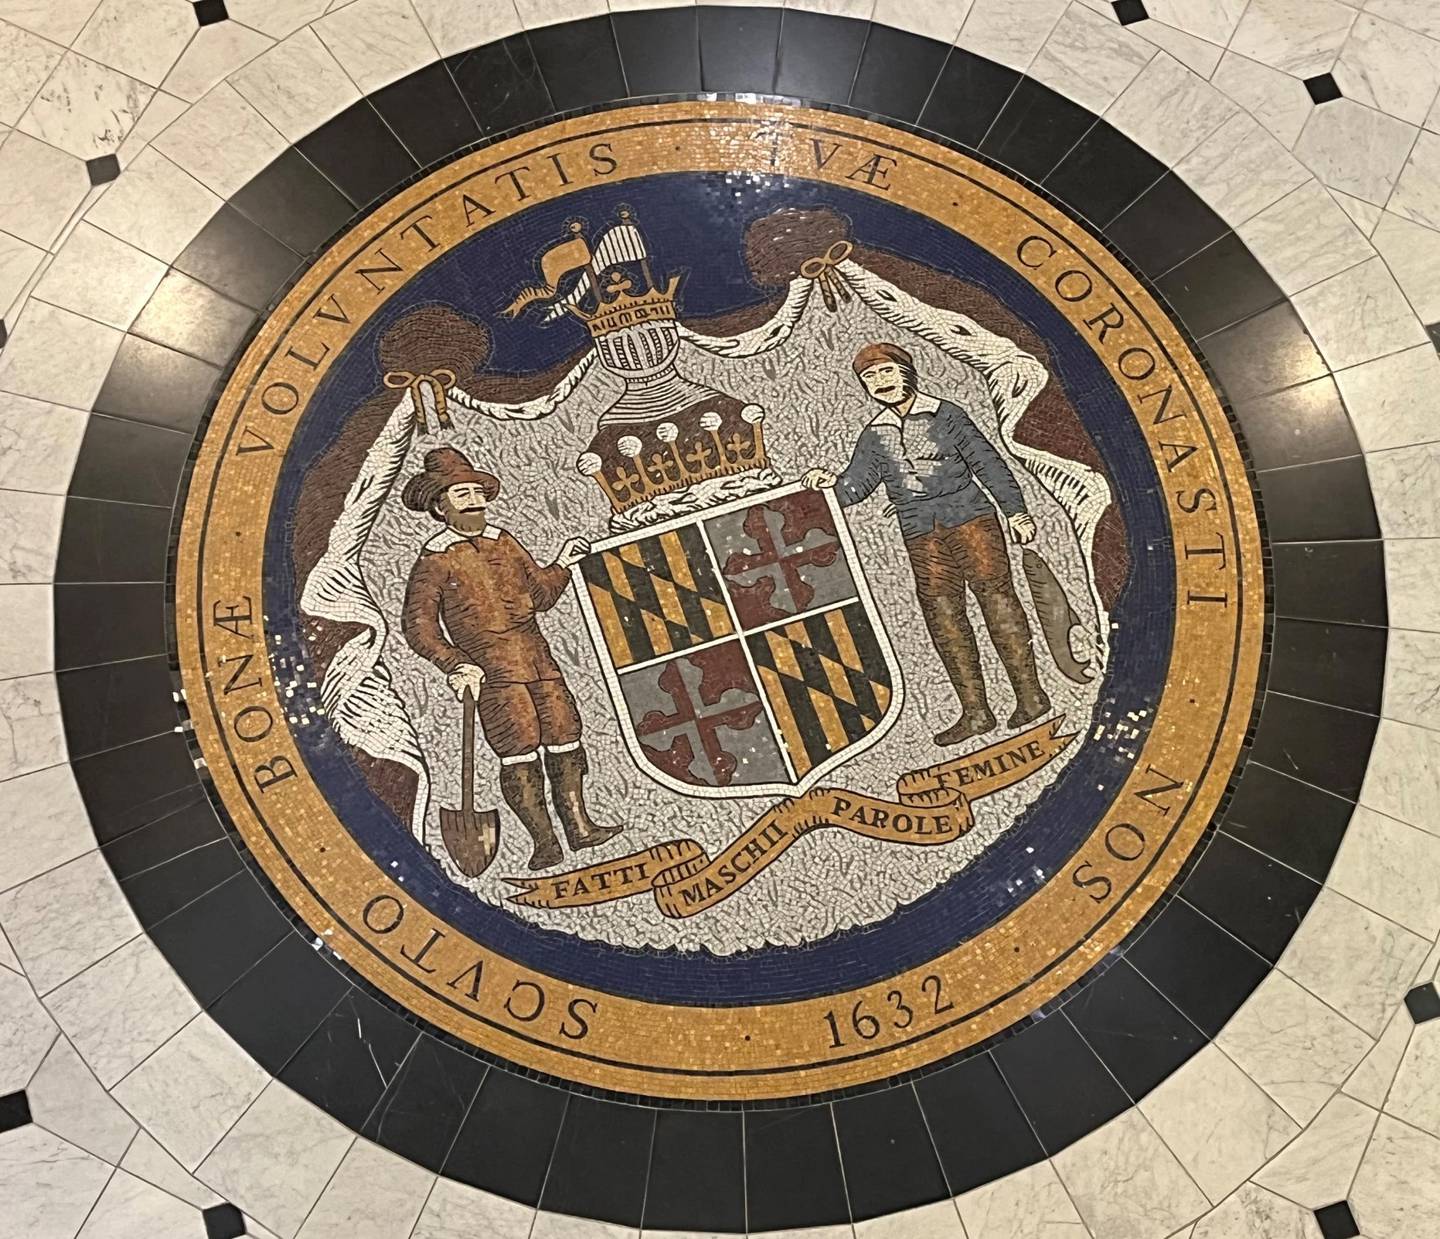 Maryland State Seal in Annapolis, Maryland.